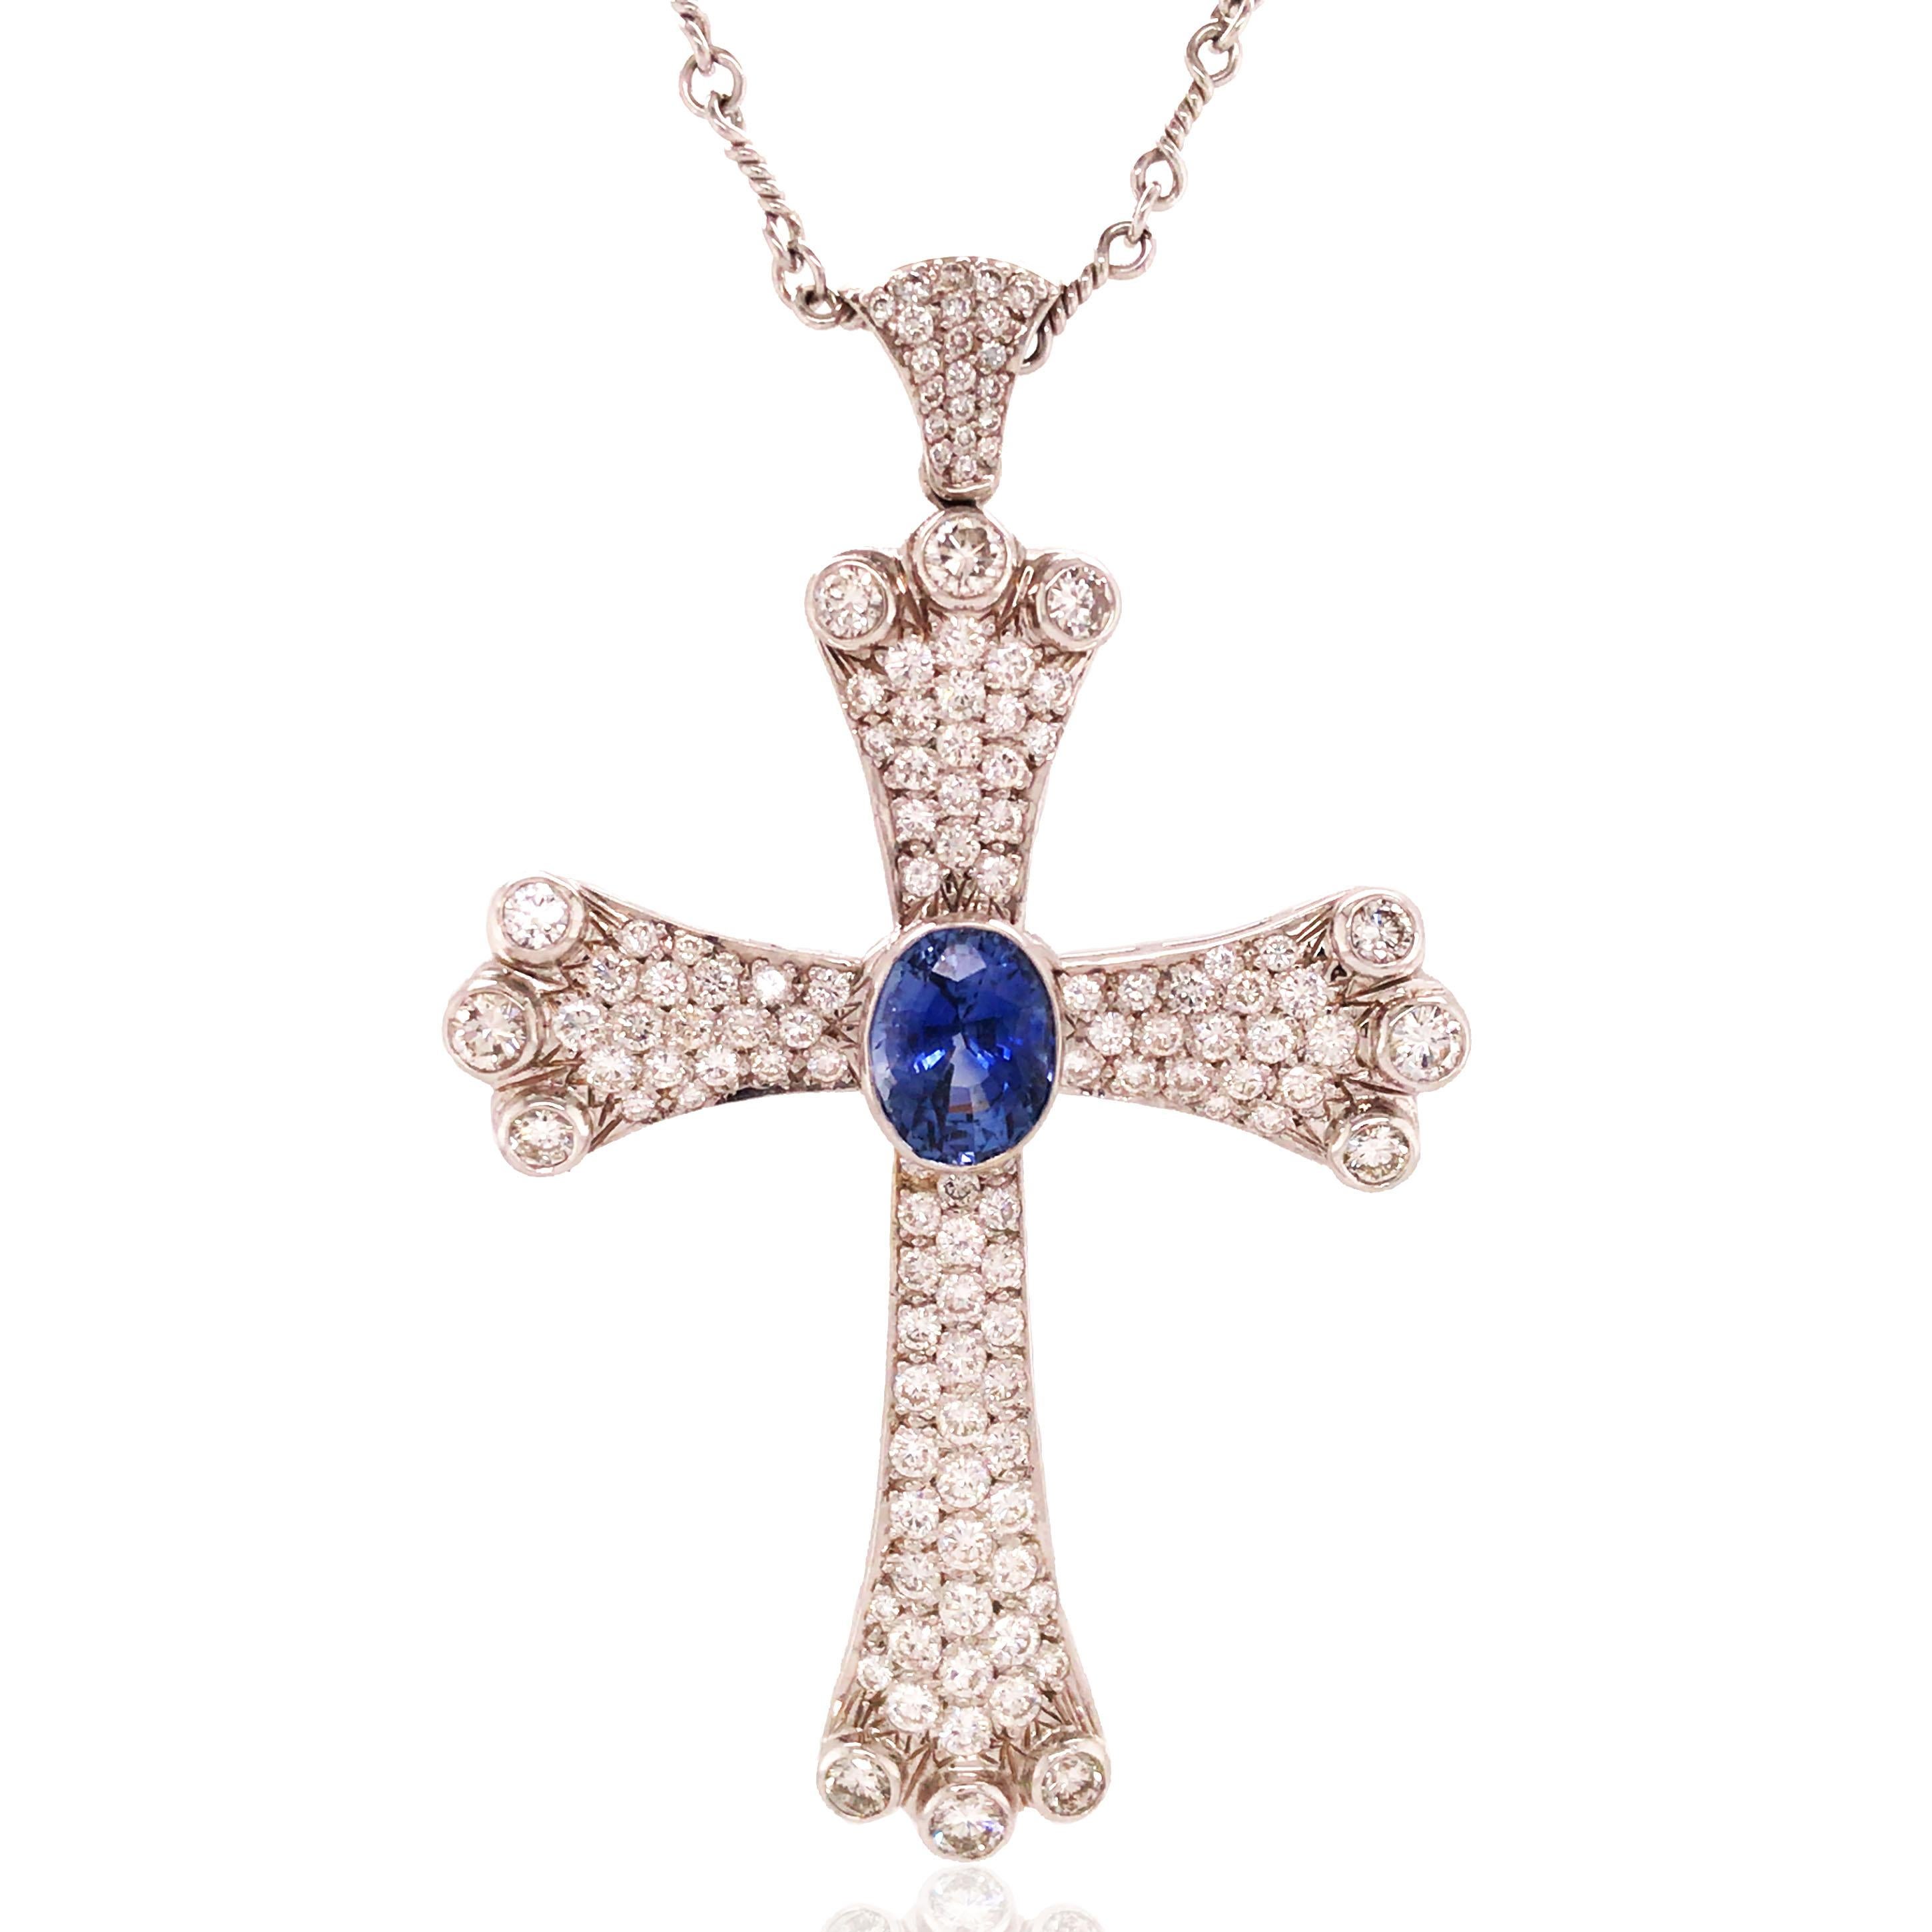 This sapphire diamond cross pendant necklace is crafted in platinum. An oval-cut sapphire is decorated in the center, surrounded by 124 round-cut diamonds. Sapphire approx. 7.3ct and diamond approx. 7.2ct in total.

Sapphire: 7.3ct
Diamond: